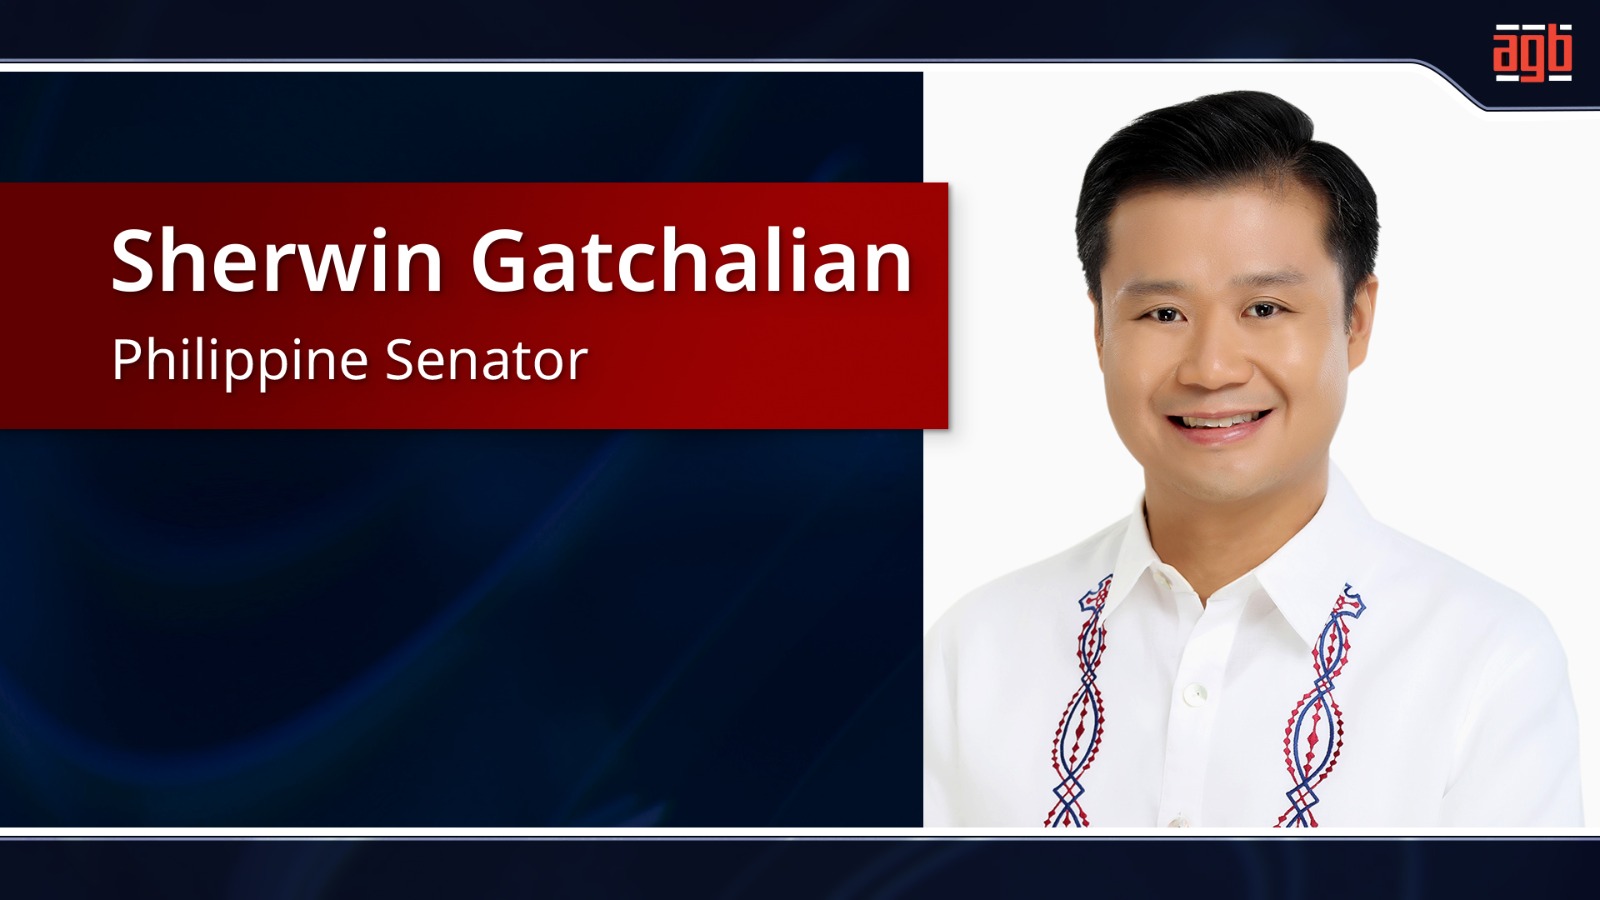 PH Senator Sherwin Gatchalian, time to end all POGOs in the Philippines